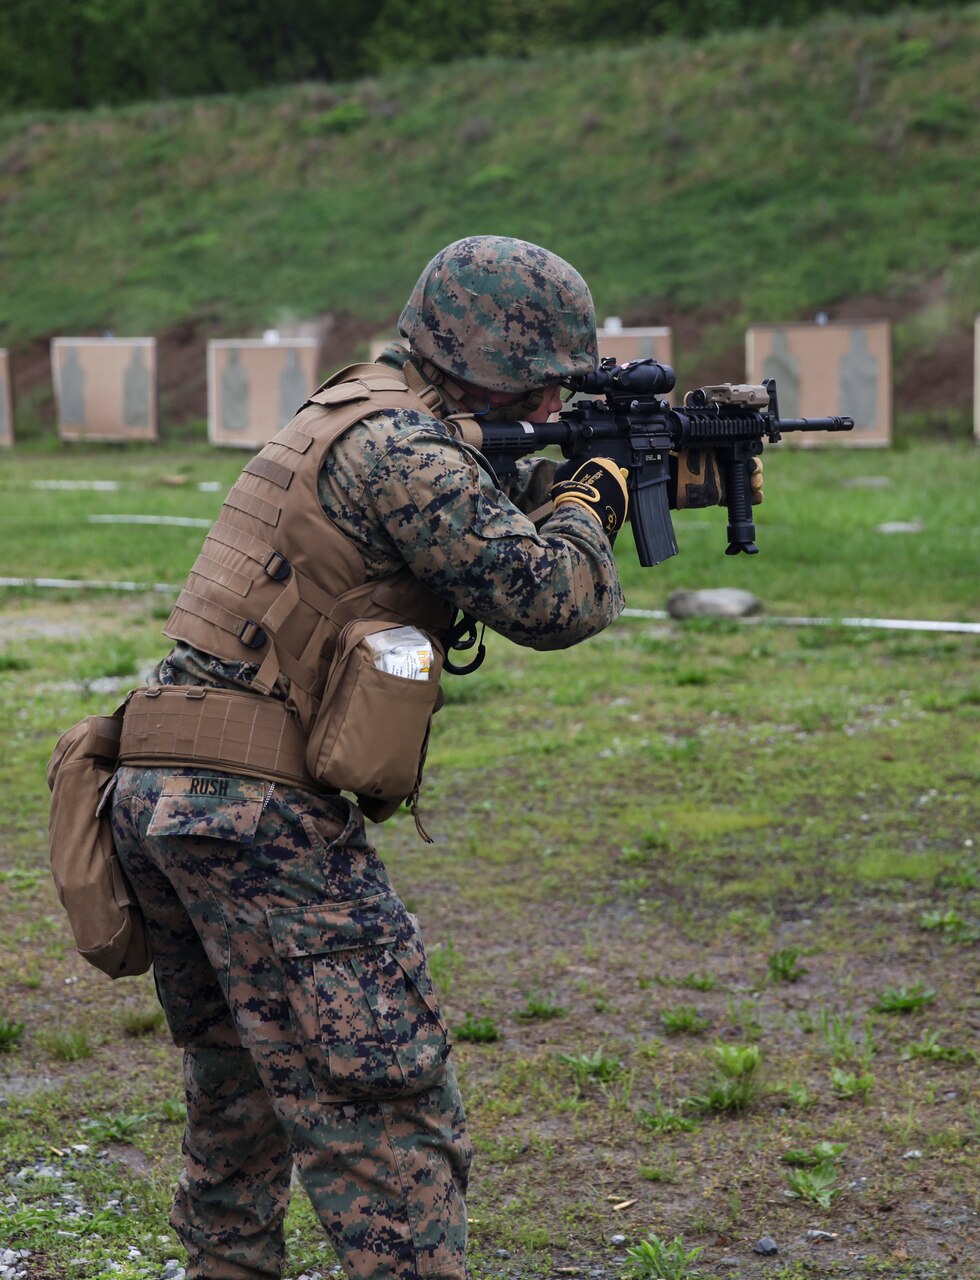 U.S. Marine Sgt. Derek R. Rush, marksmanship coach with Headquarters and Service Company, 6th Engineer Support Battalion, 4th Marine Logistics Group, Marine Forces Reserve, shoots at his target during a live fire range of tables five and six during exercise Red Dagger at Fort Indiantown Gap, Pa., May 14, 2018.